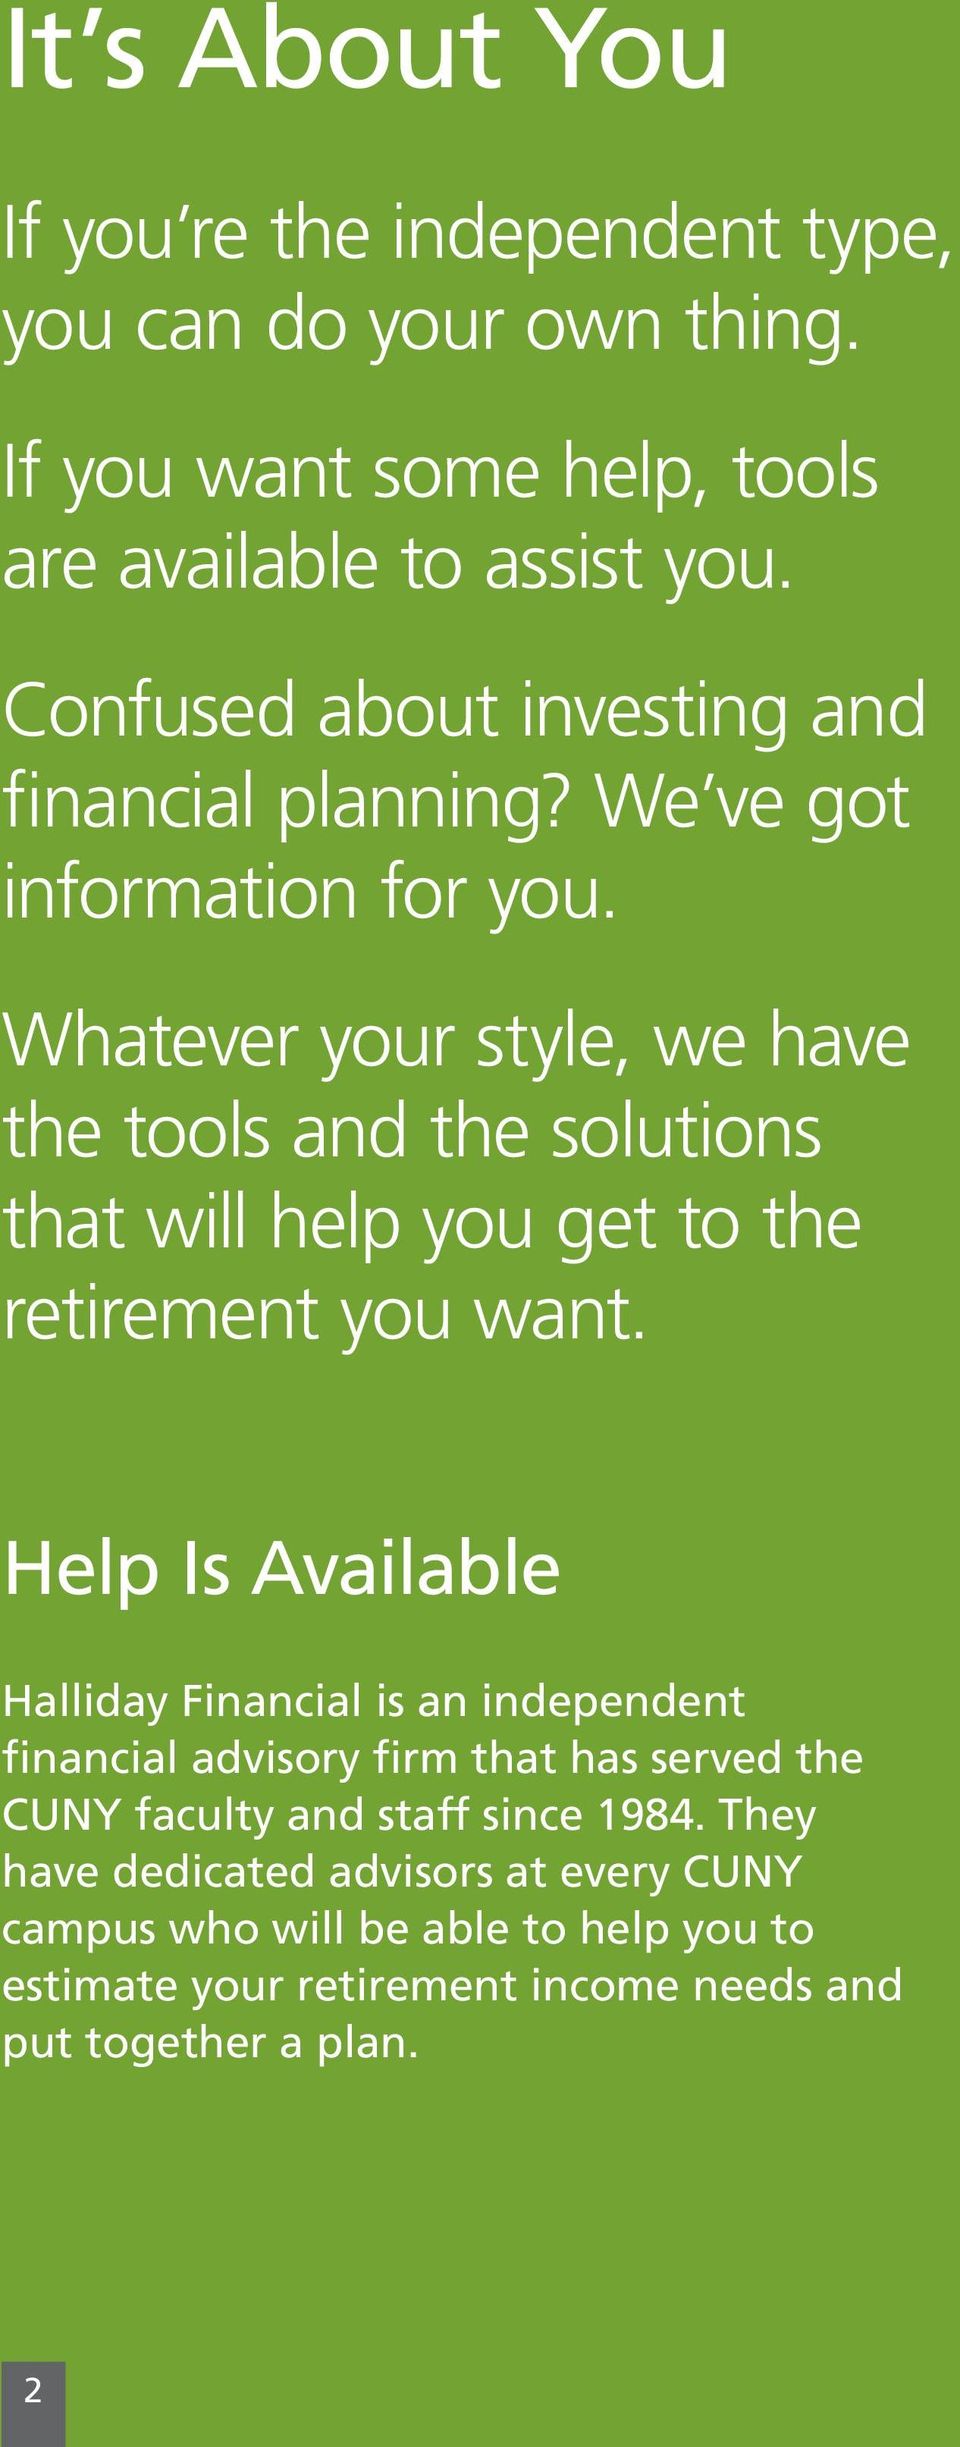 Whatever your style, we have the tools and the solutions that will help you get to the retirement you want.